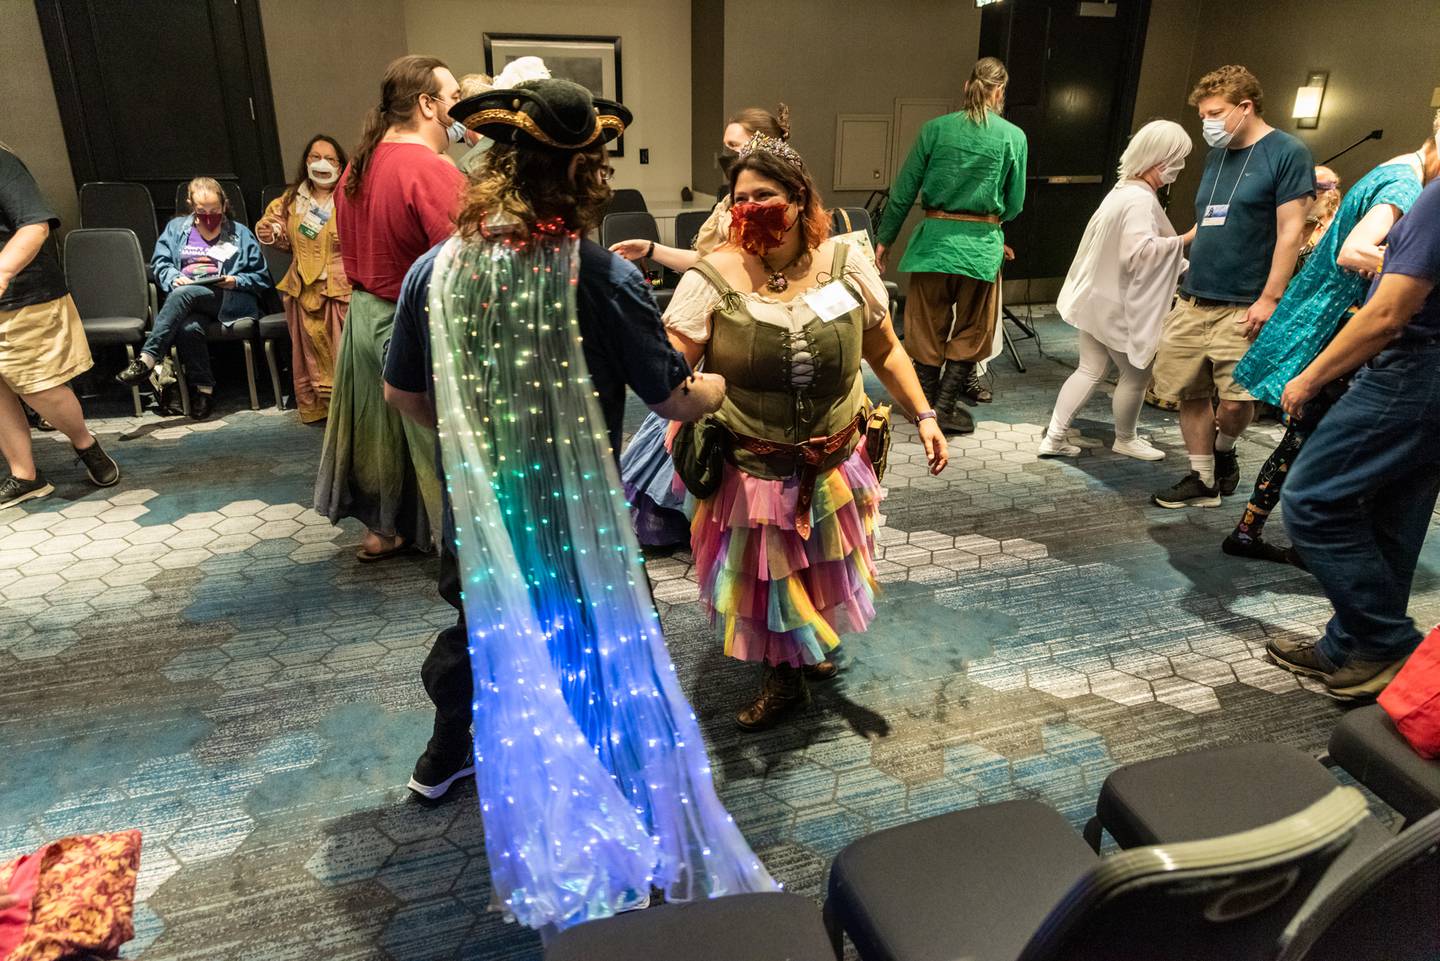 Attendees learn "Upon a Summer's Day", an English country dance, at the Renaissance Dance workshop. Live music performed by Maugorn the Stray (Steve Haug) and Bob and Sue Esty. Balticon 57 at Renaissance Harborplace Hotel, Baltimore, Maryland.